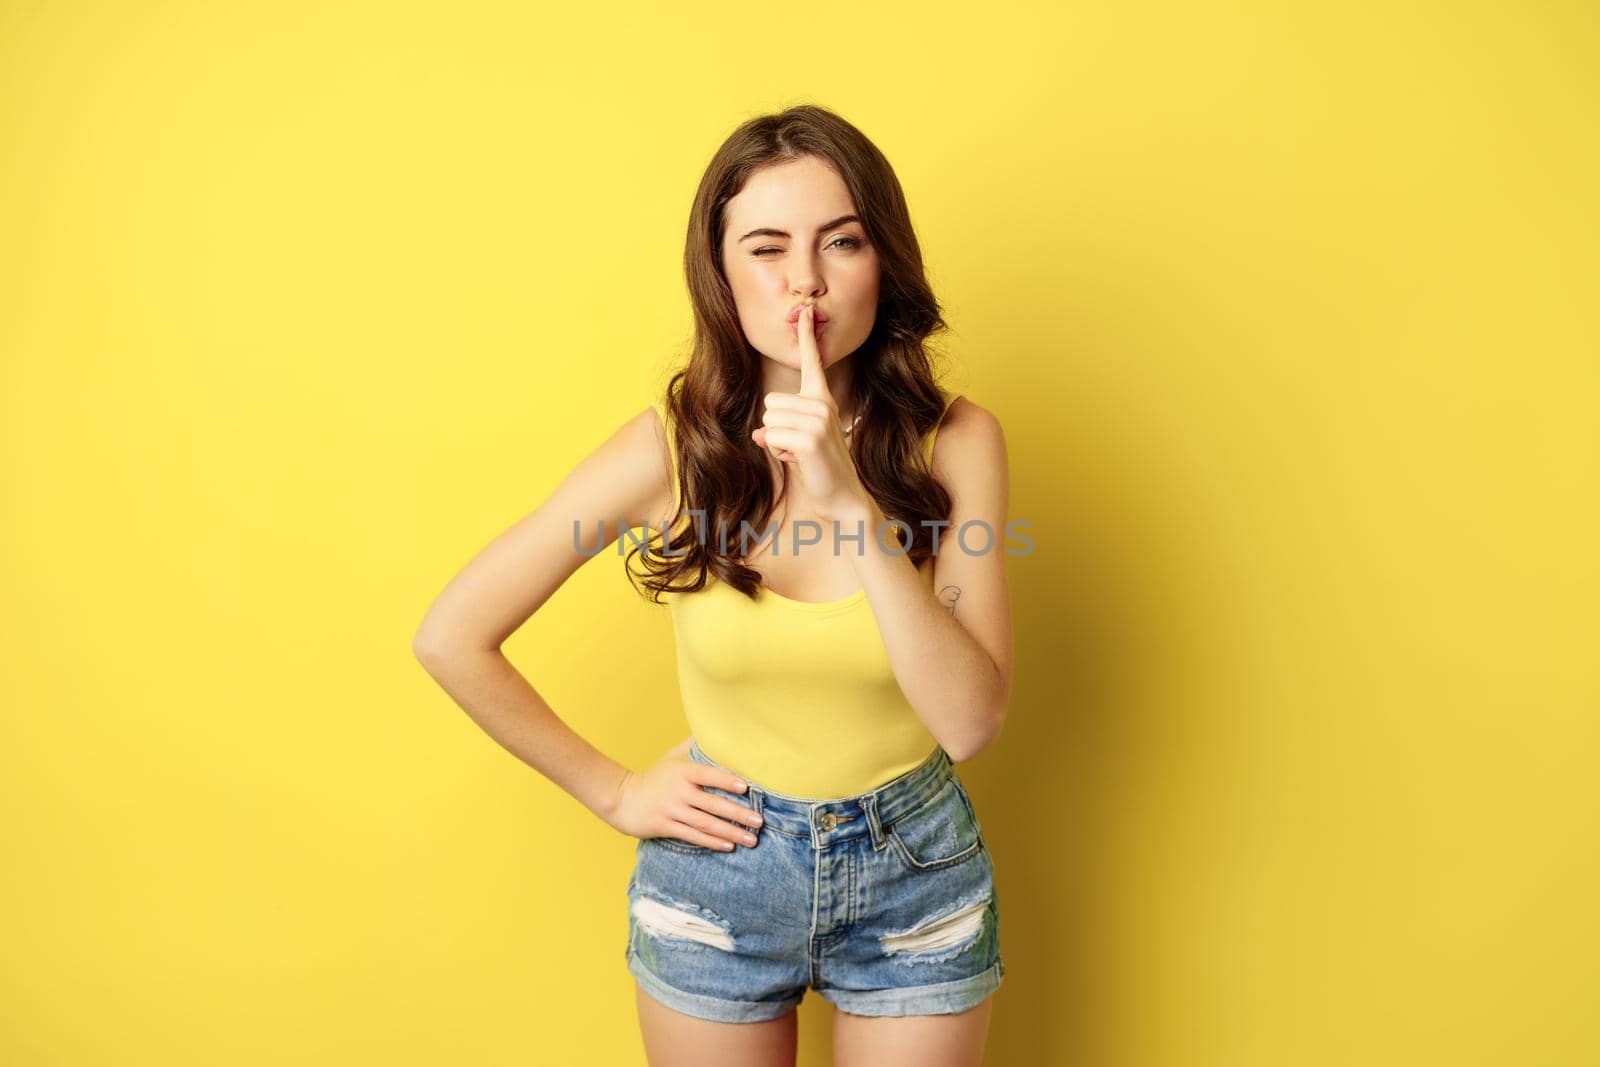 Young woman keeps secret, shows silence quiet, shush gesture, hushing, press finger to lips, standing over yellow background. Copy space